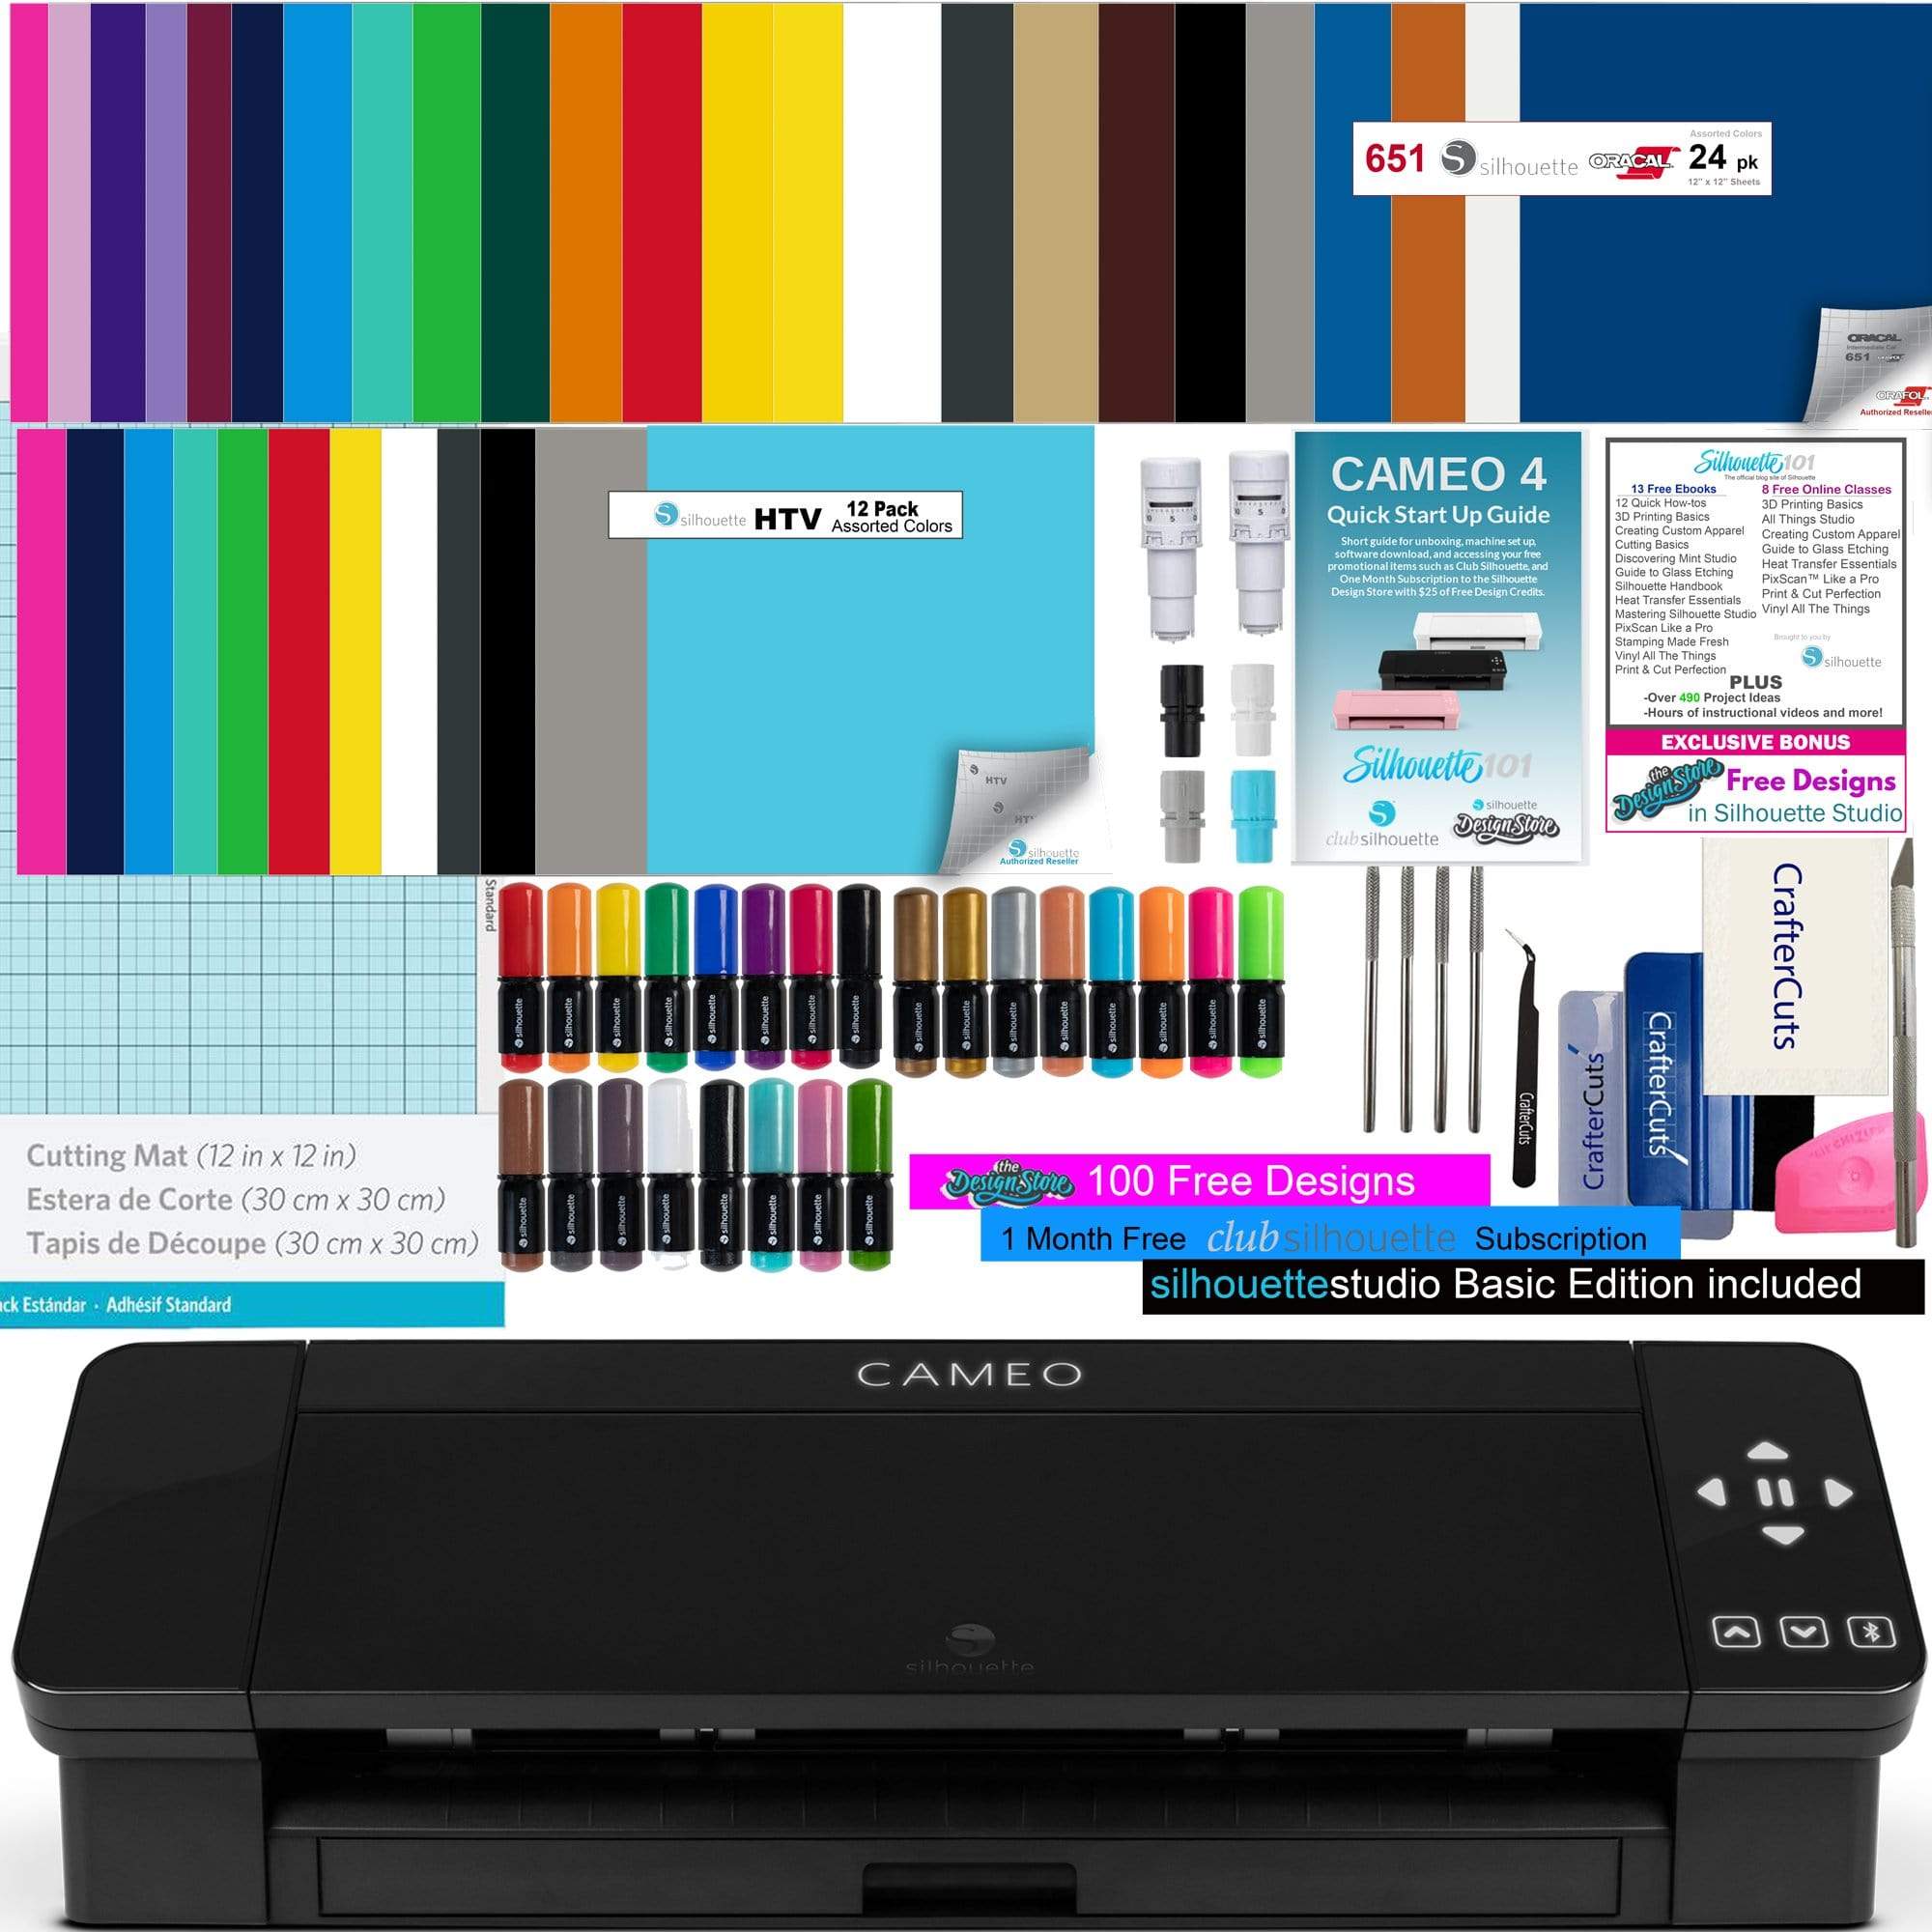 Silhouette America Silhouette Cameo 4 Deluxe Vinyl Bundle with 24 Sheets of Vinyl, 12 sheets of HTV, 24 Pack pens, Vinyl Tool Kit, 2 Autoblades, and 150 Designs- Black